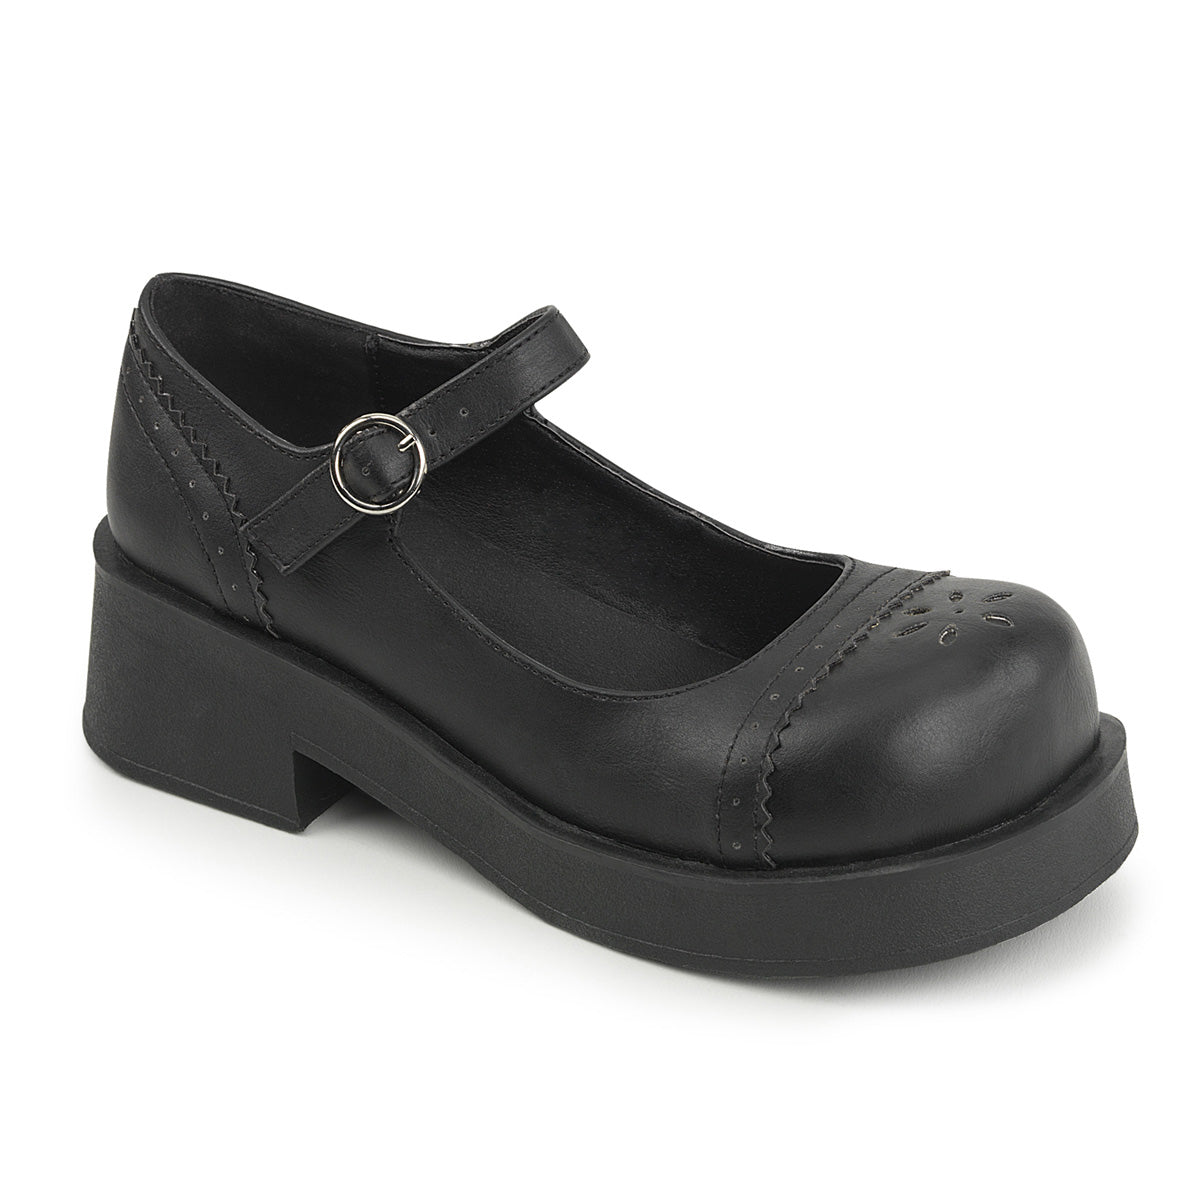 The Black Leatherette Gothic Lolita Mary Janes, right side view.